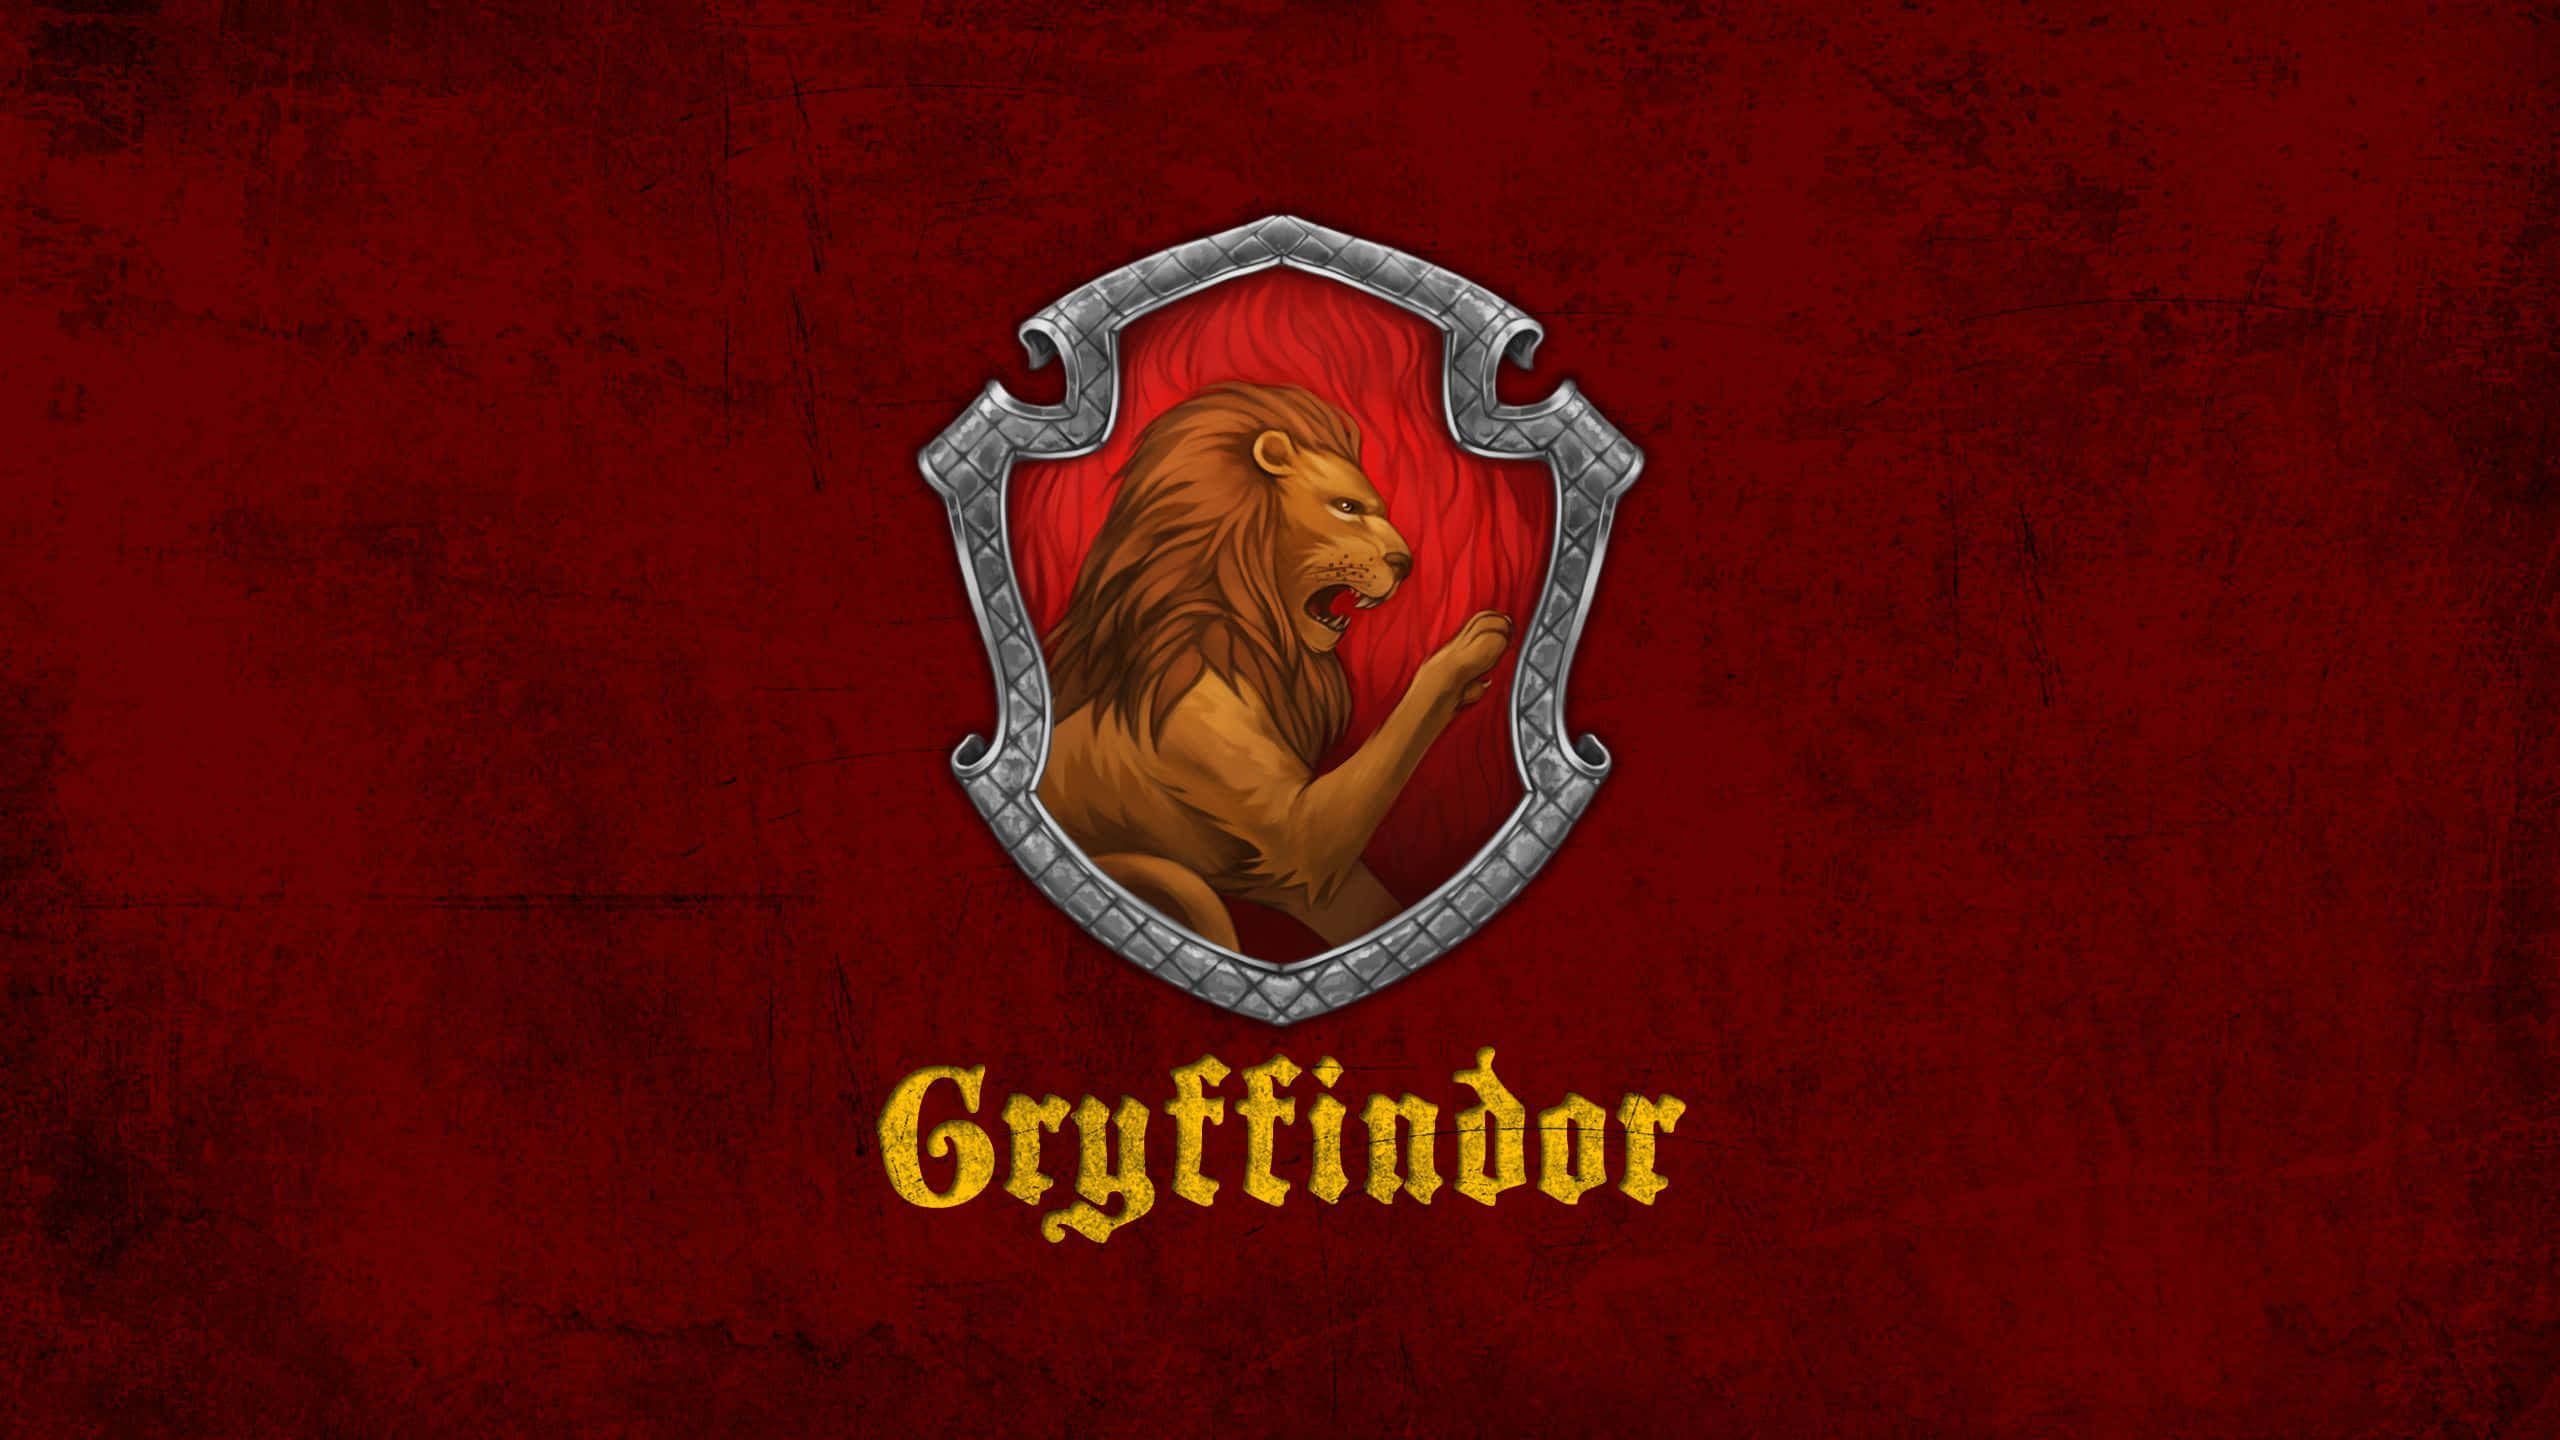 Proudly Displaying our Colors - Gryffindor